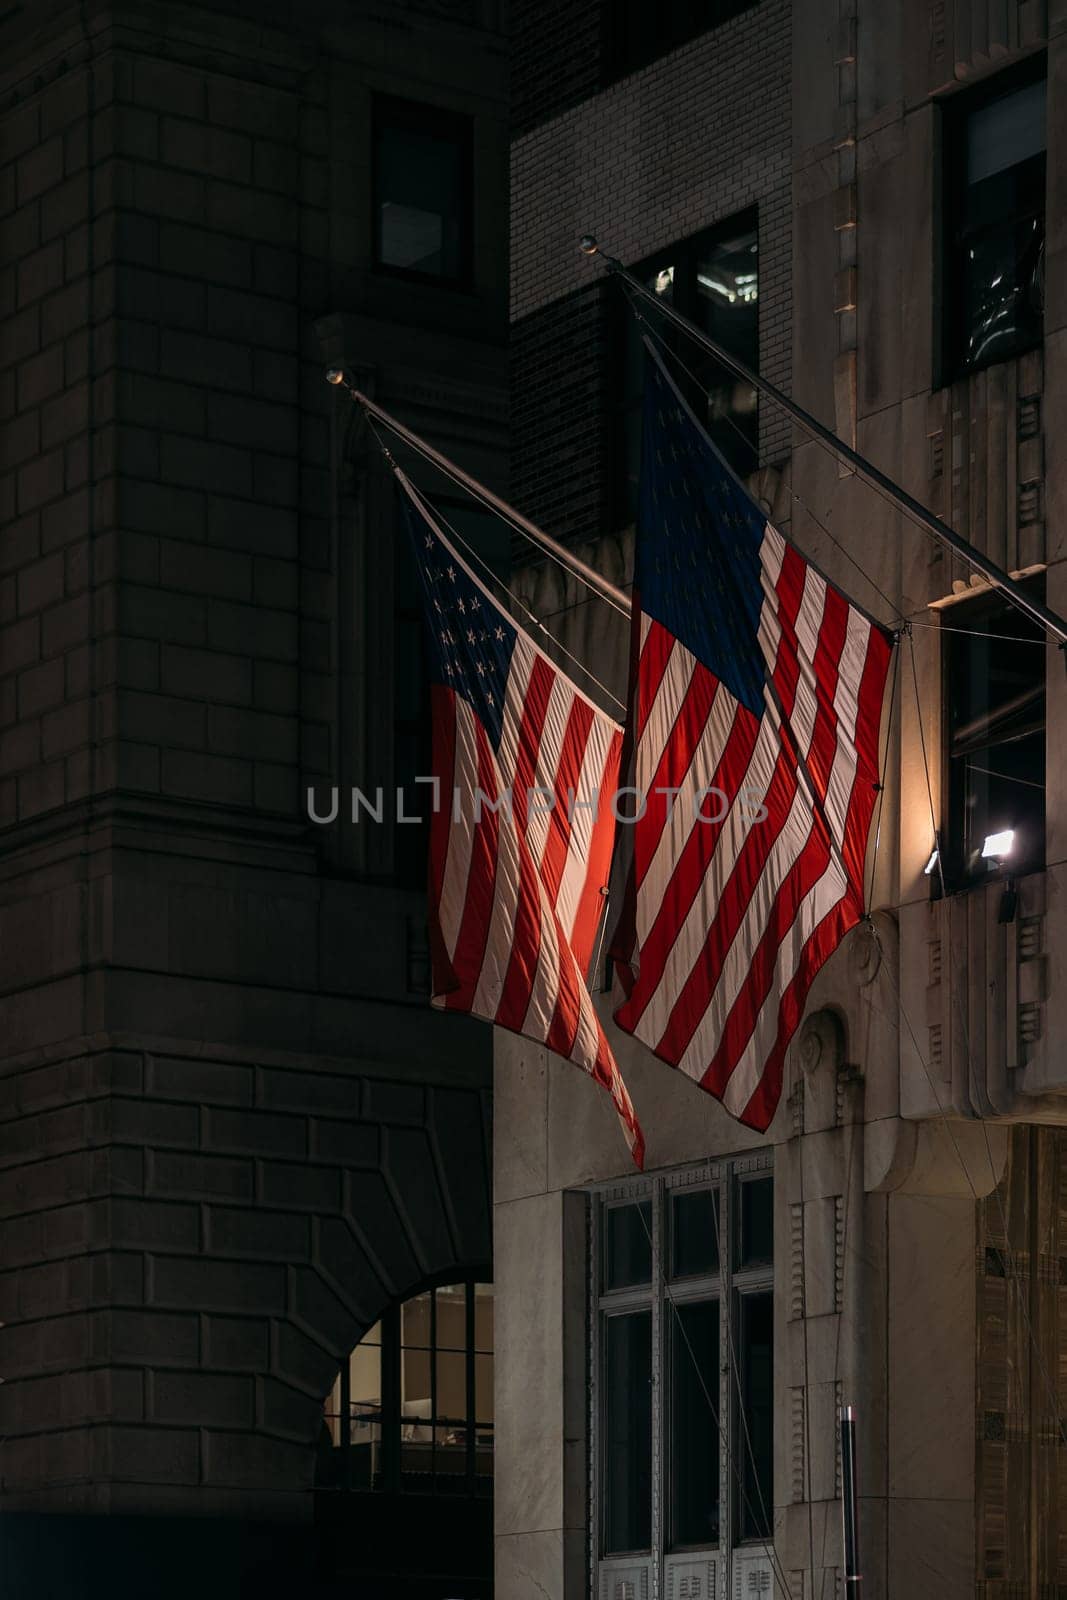 Two American flags wave in the night, anchored on an urban building.